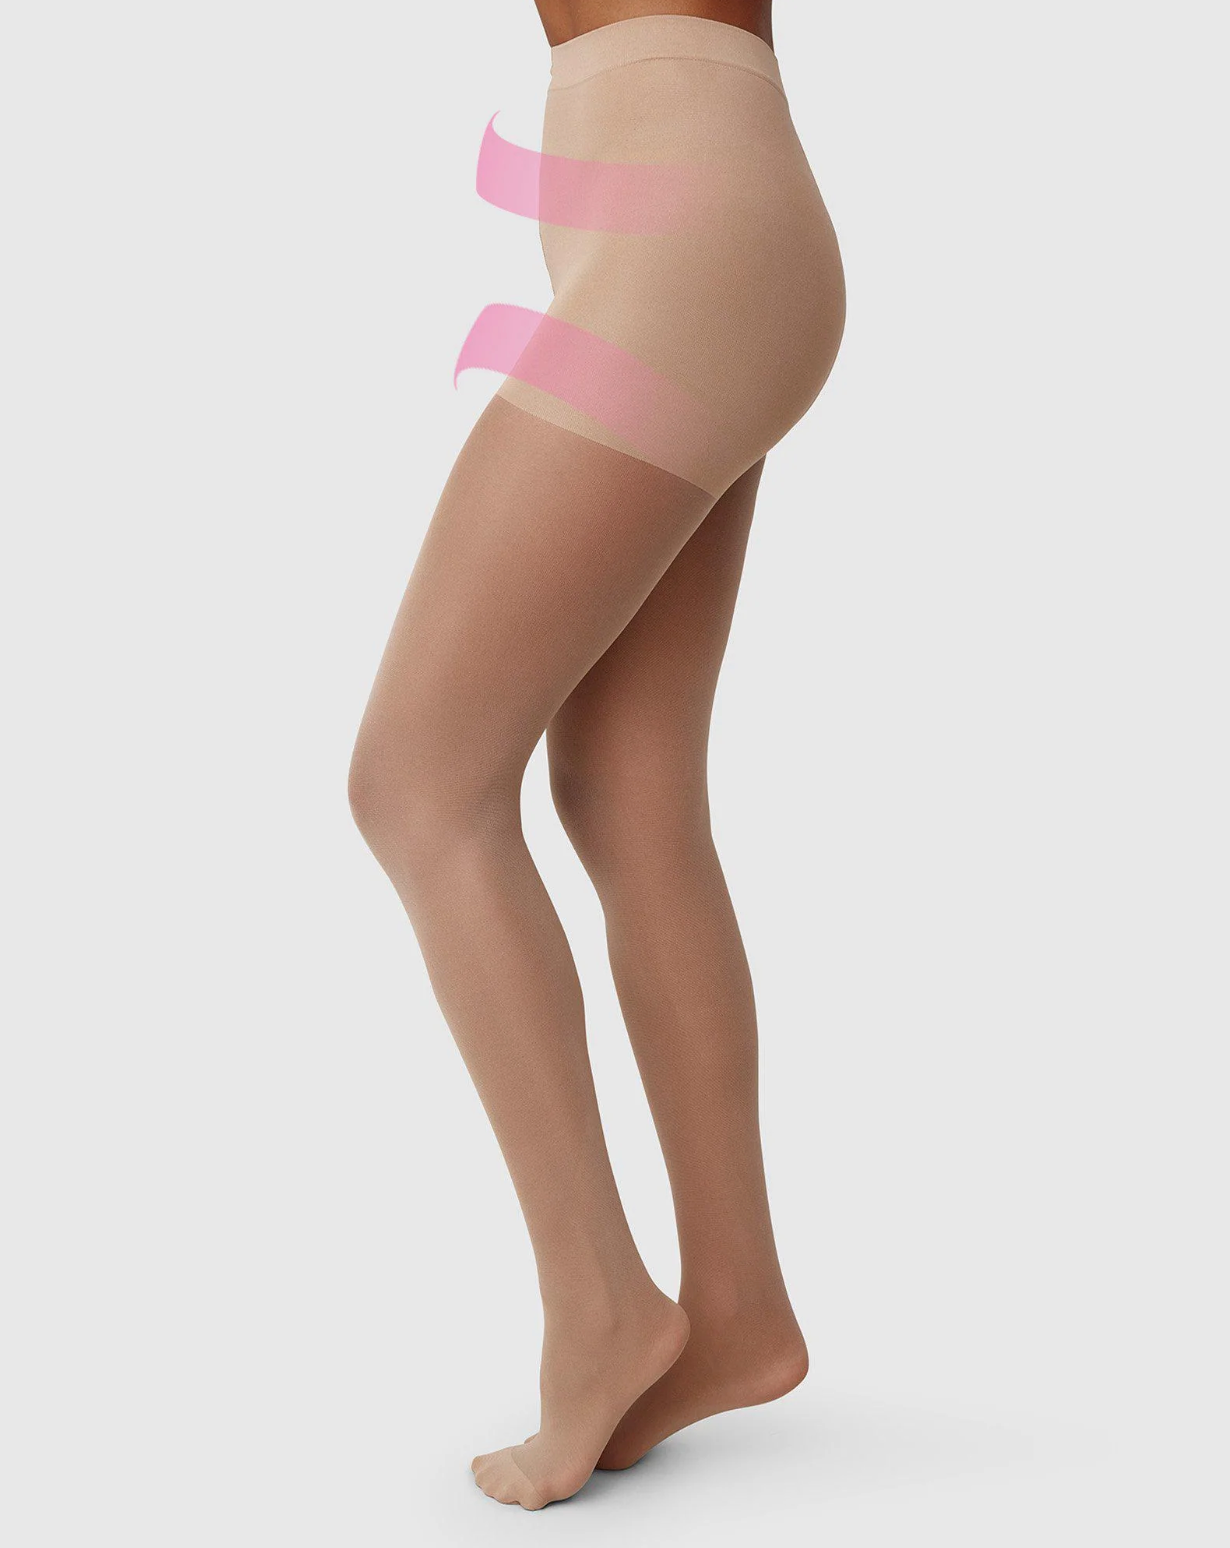 Moa Control Top Tights Sand